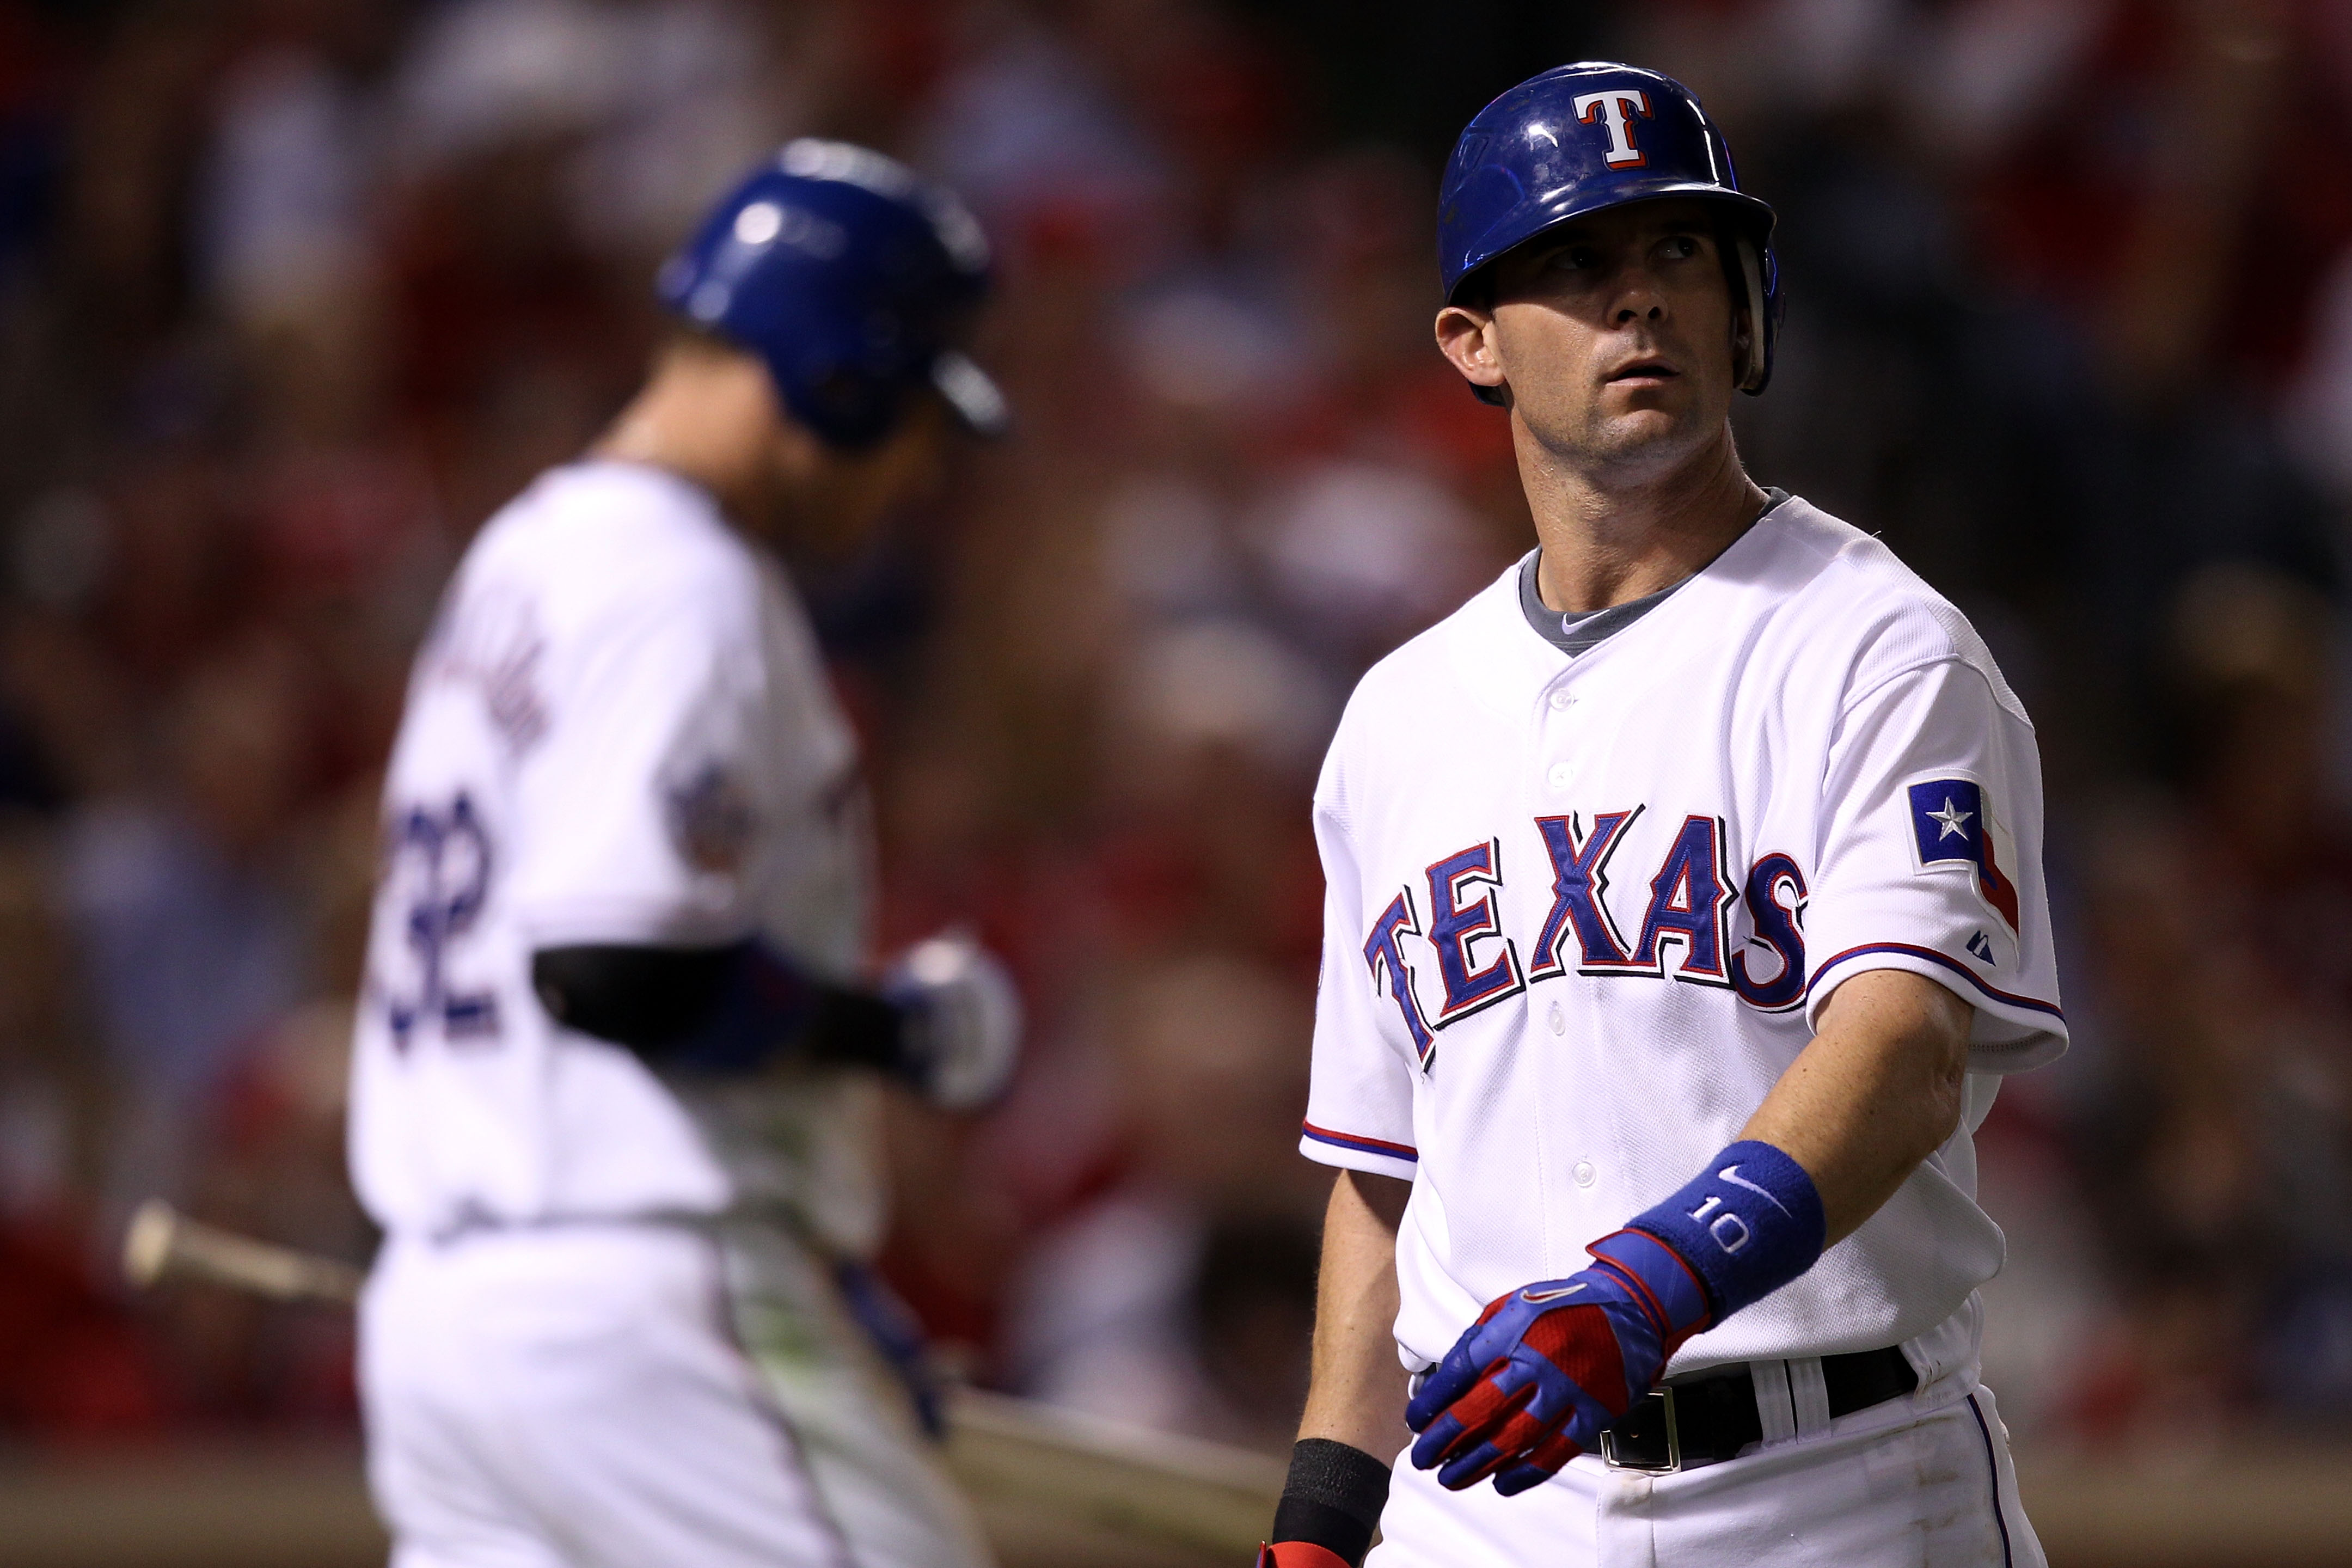 Former Texas Rangers star Michael Young is greeted by his son